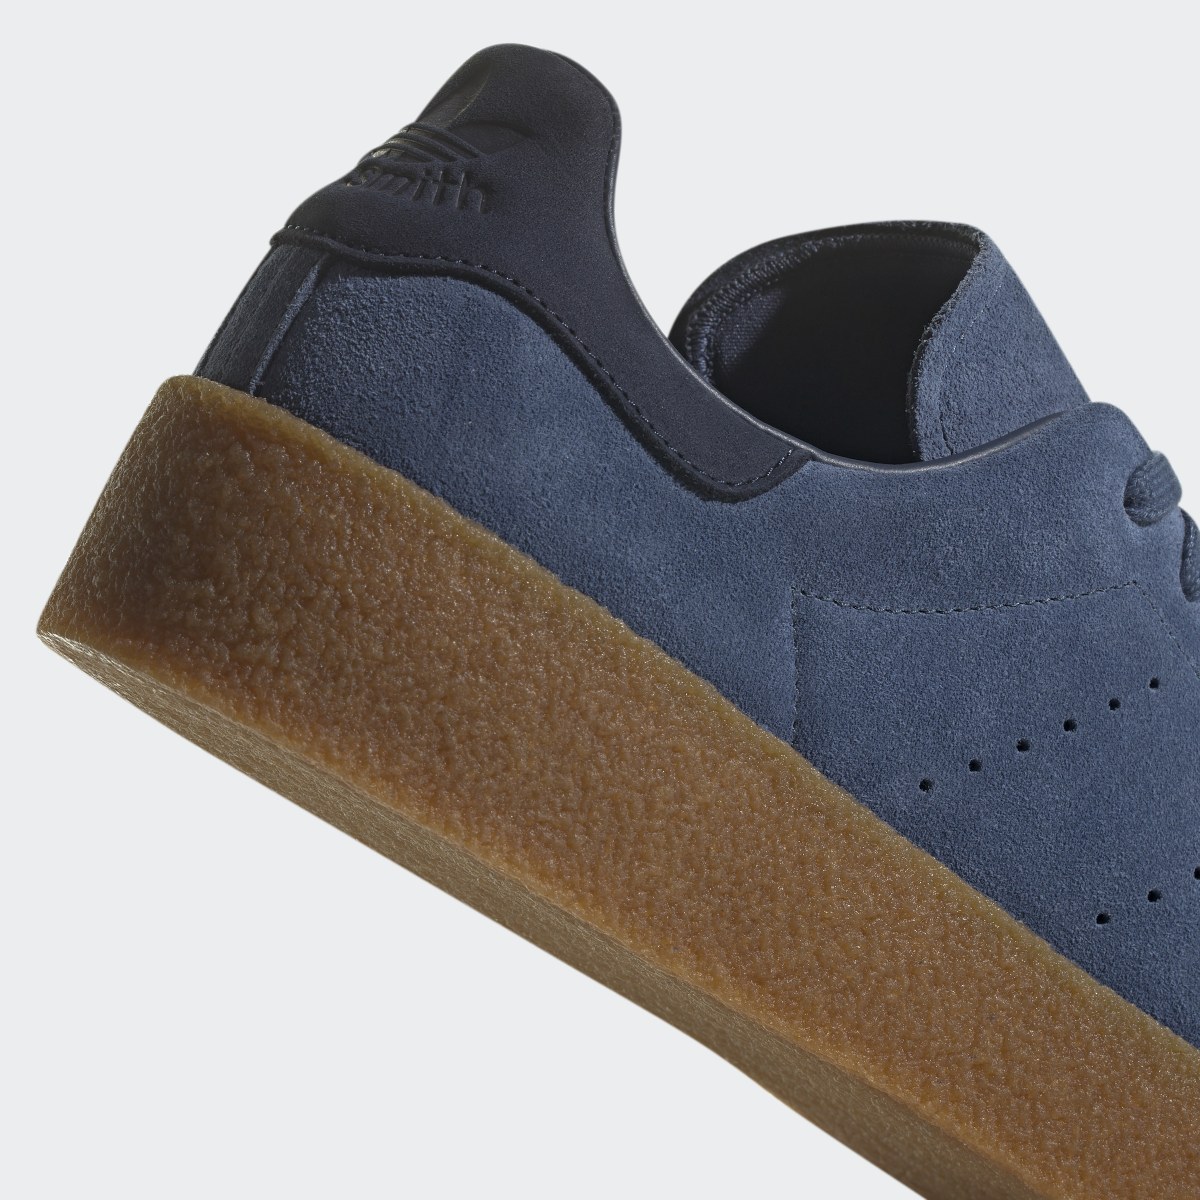 Adidas Stan Smith Crepe Shoes. 9